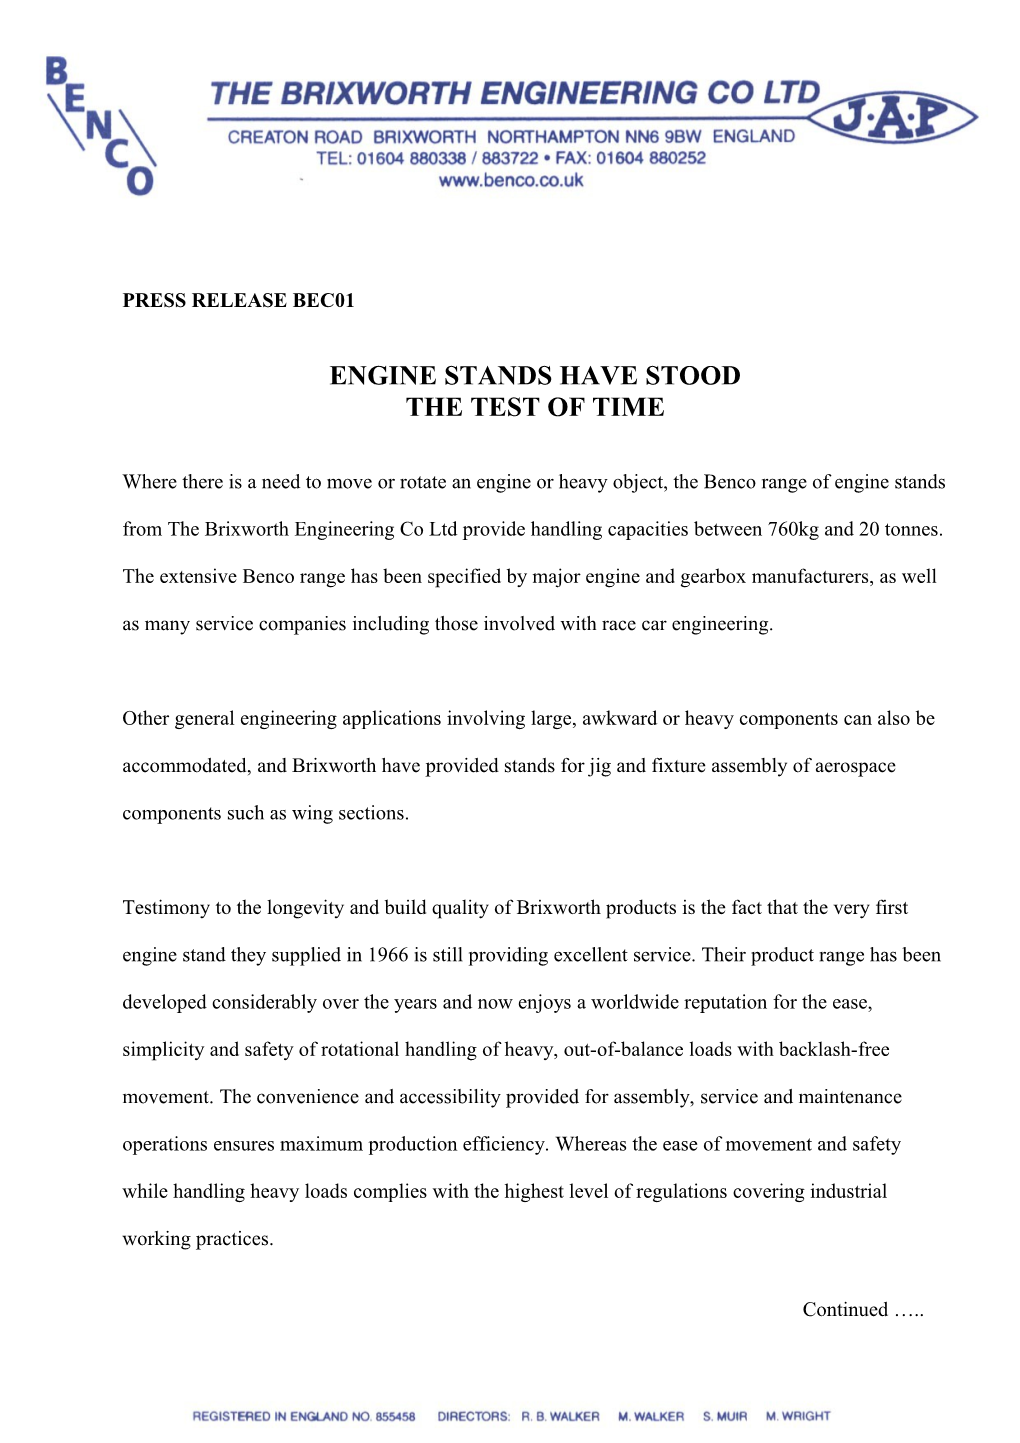 Press Release Bec01 - the Brixworth Engineering Co Ltd (Page 1 of 3)